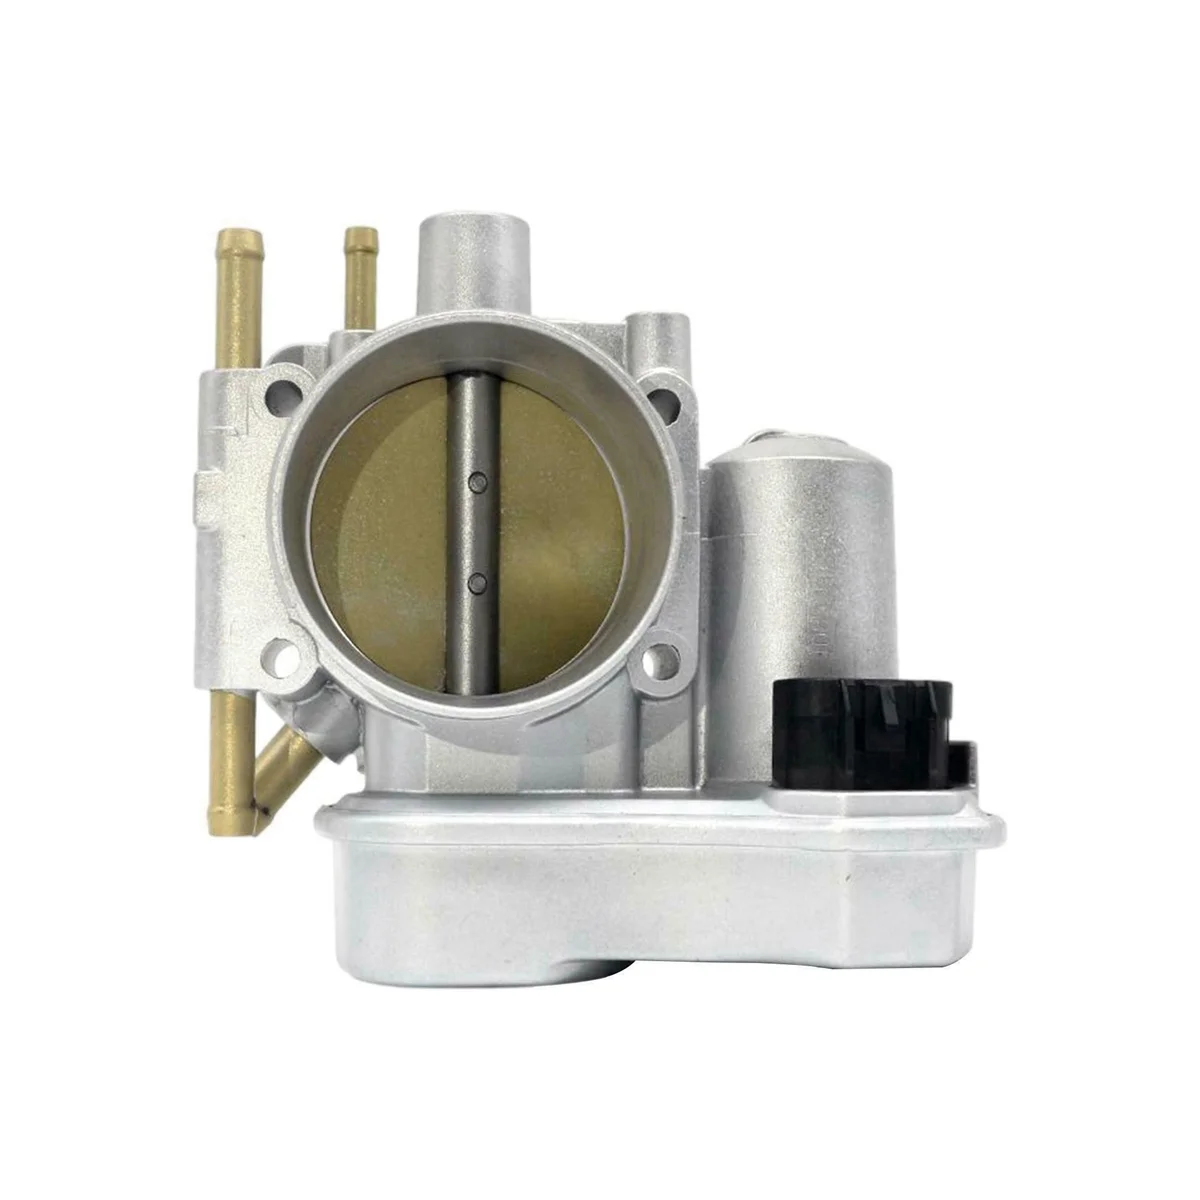 

Car Throttle Body 09128518 Fits for Vauxhall Astra/Zafira/Vectra/Corsa Saab 9-3 for 1.8